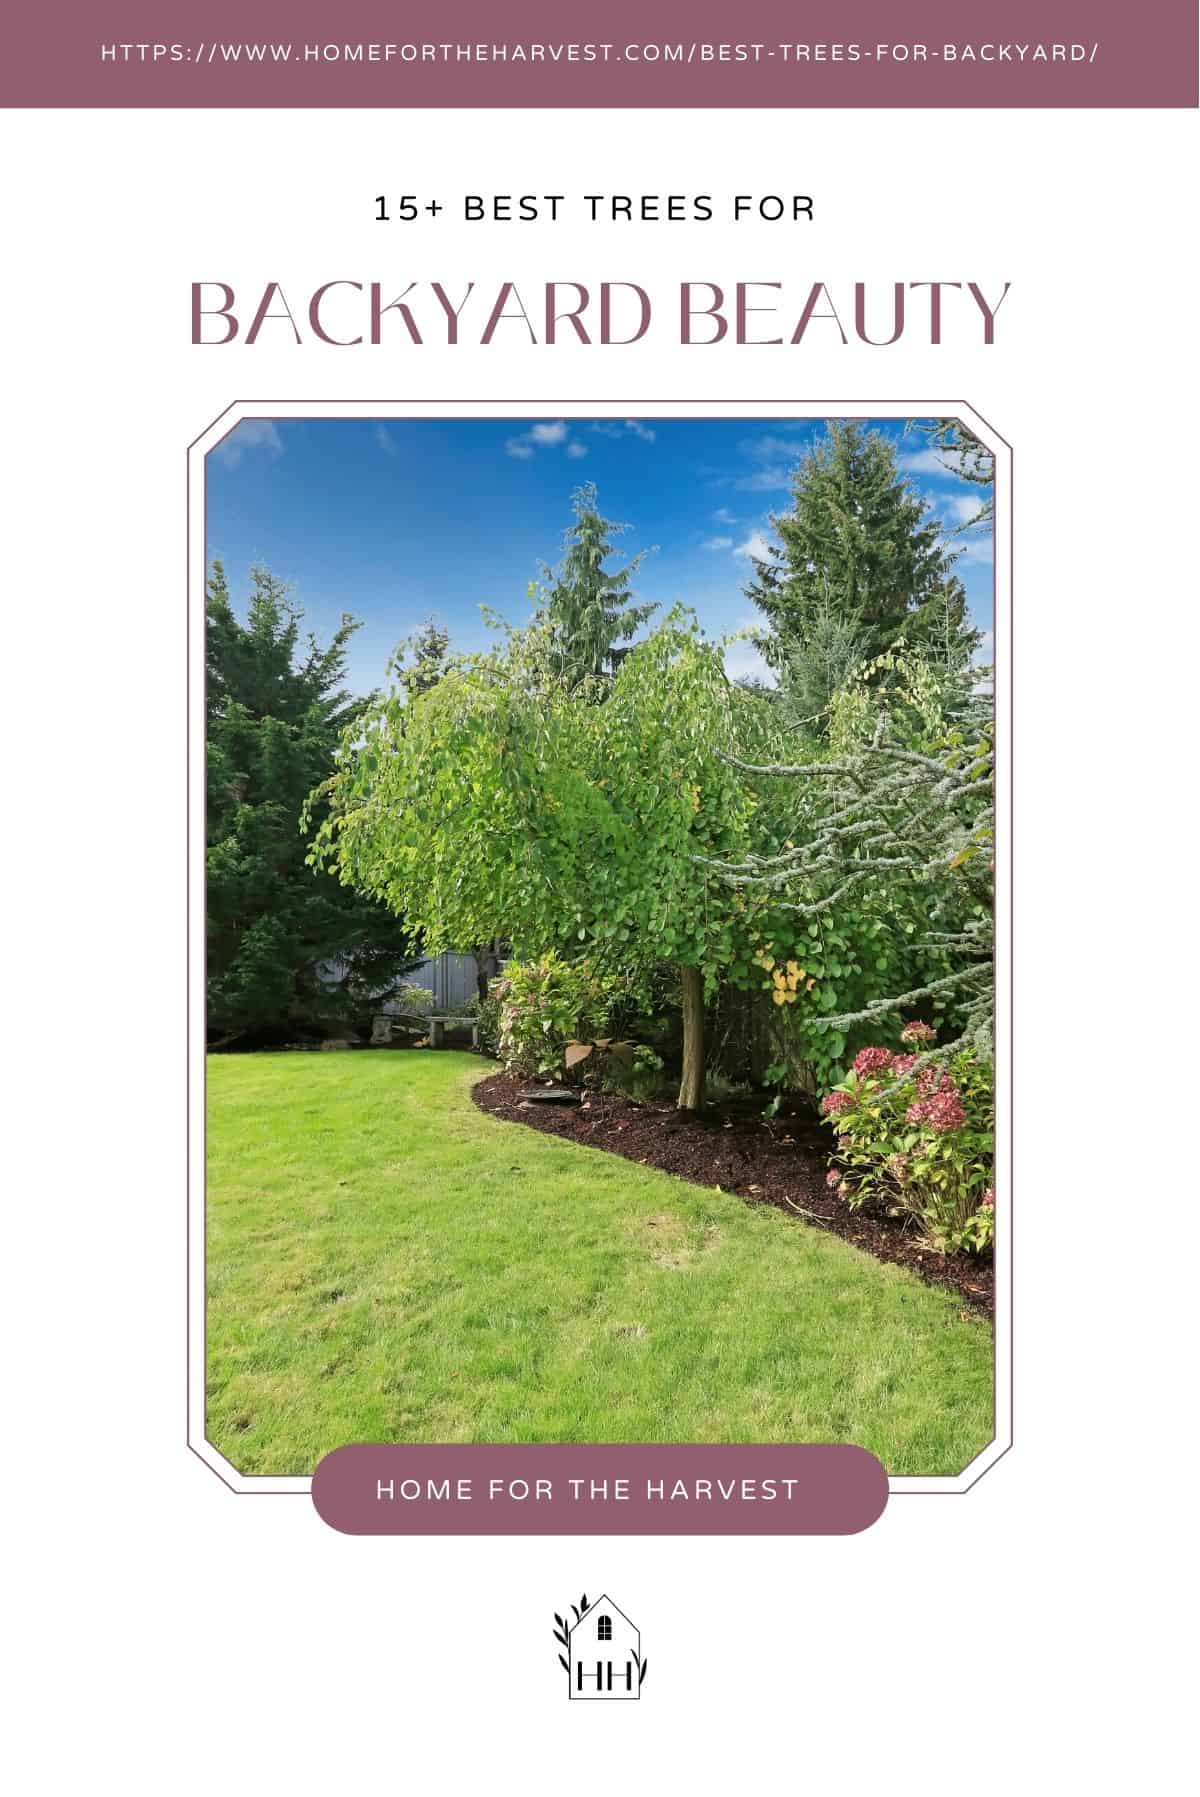 15+ best trees for backyard beauty, shade, and privacy - pinterest via @home4theharvest